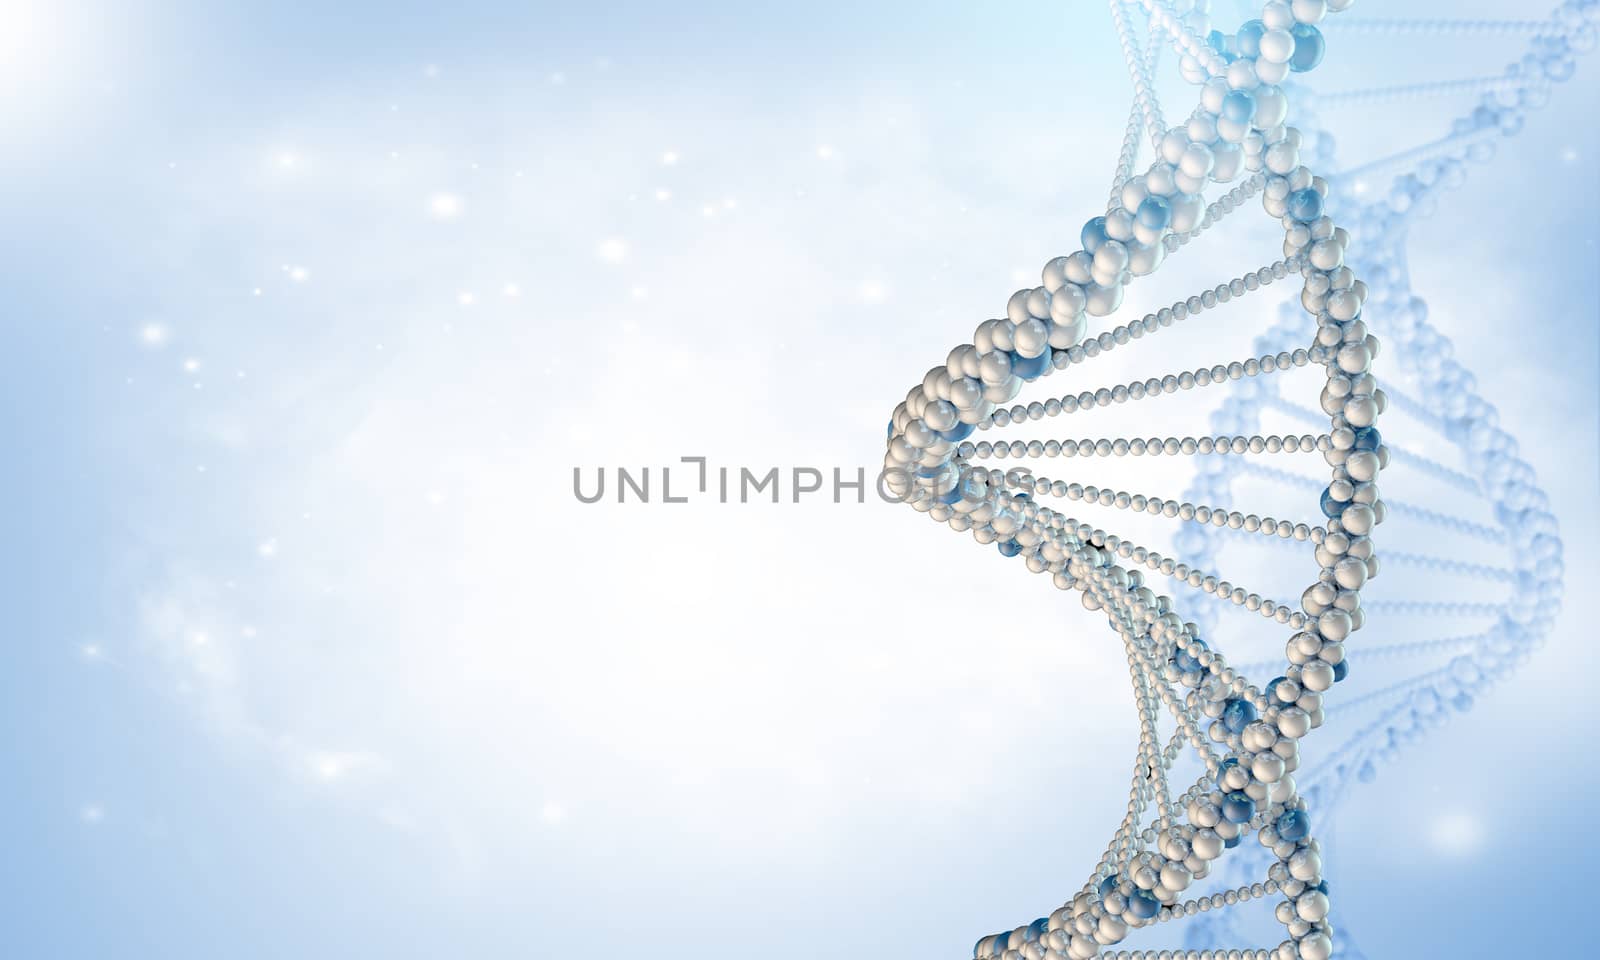 DNA model on the blue gradient background